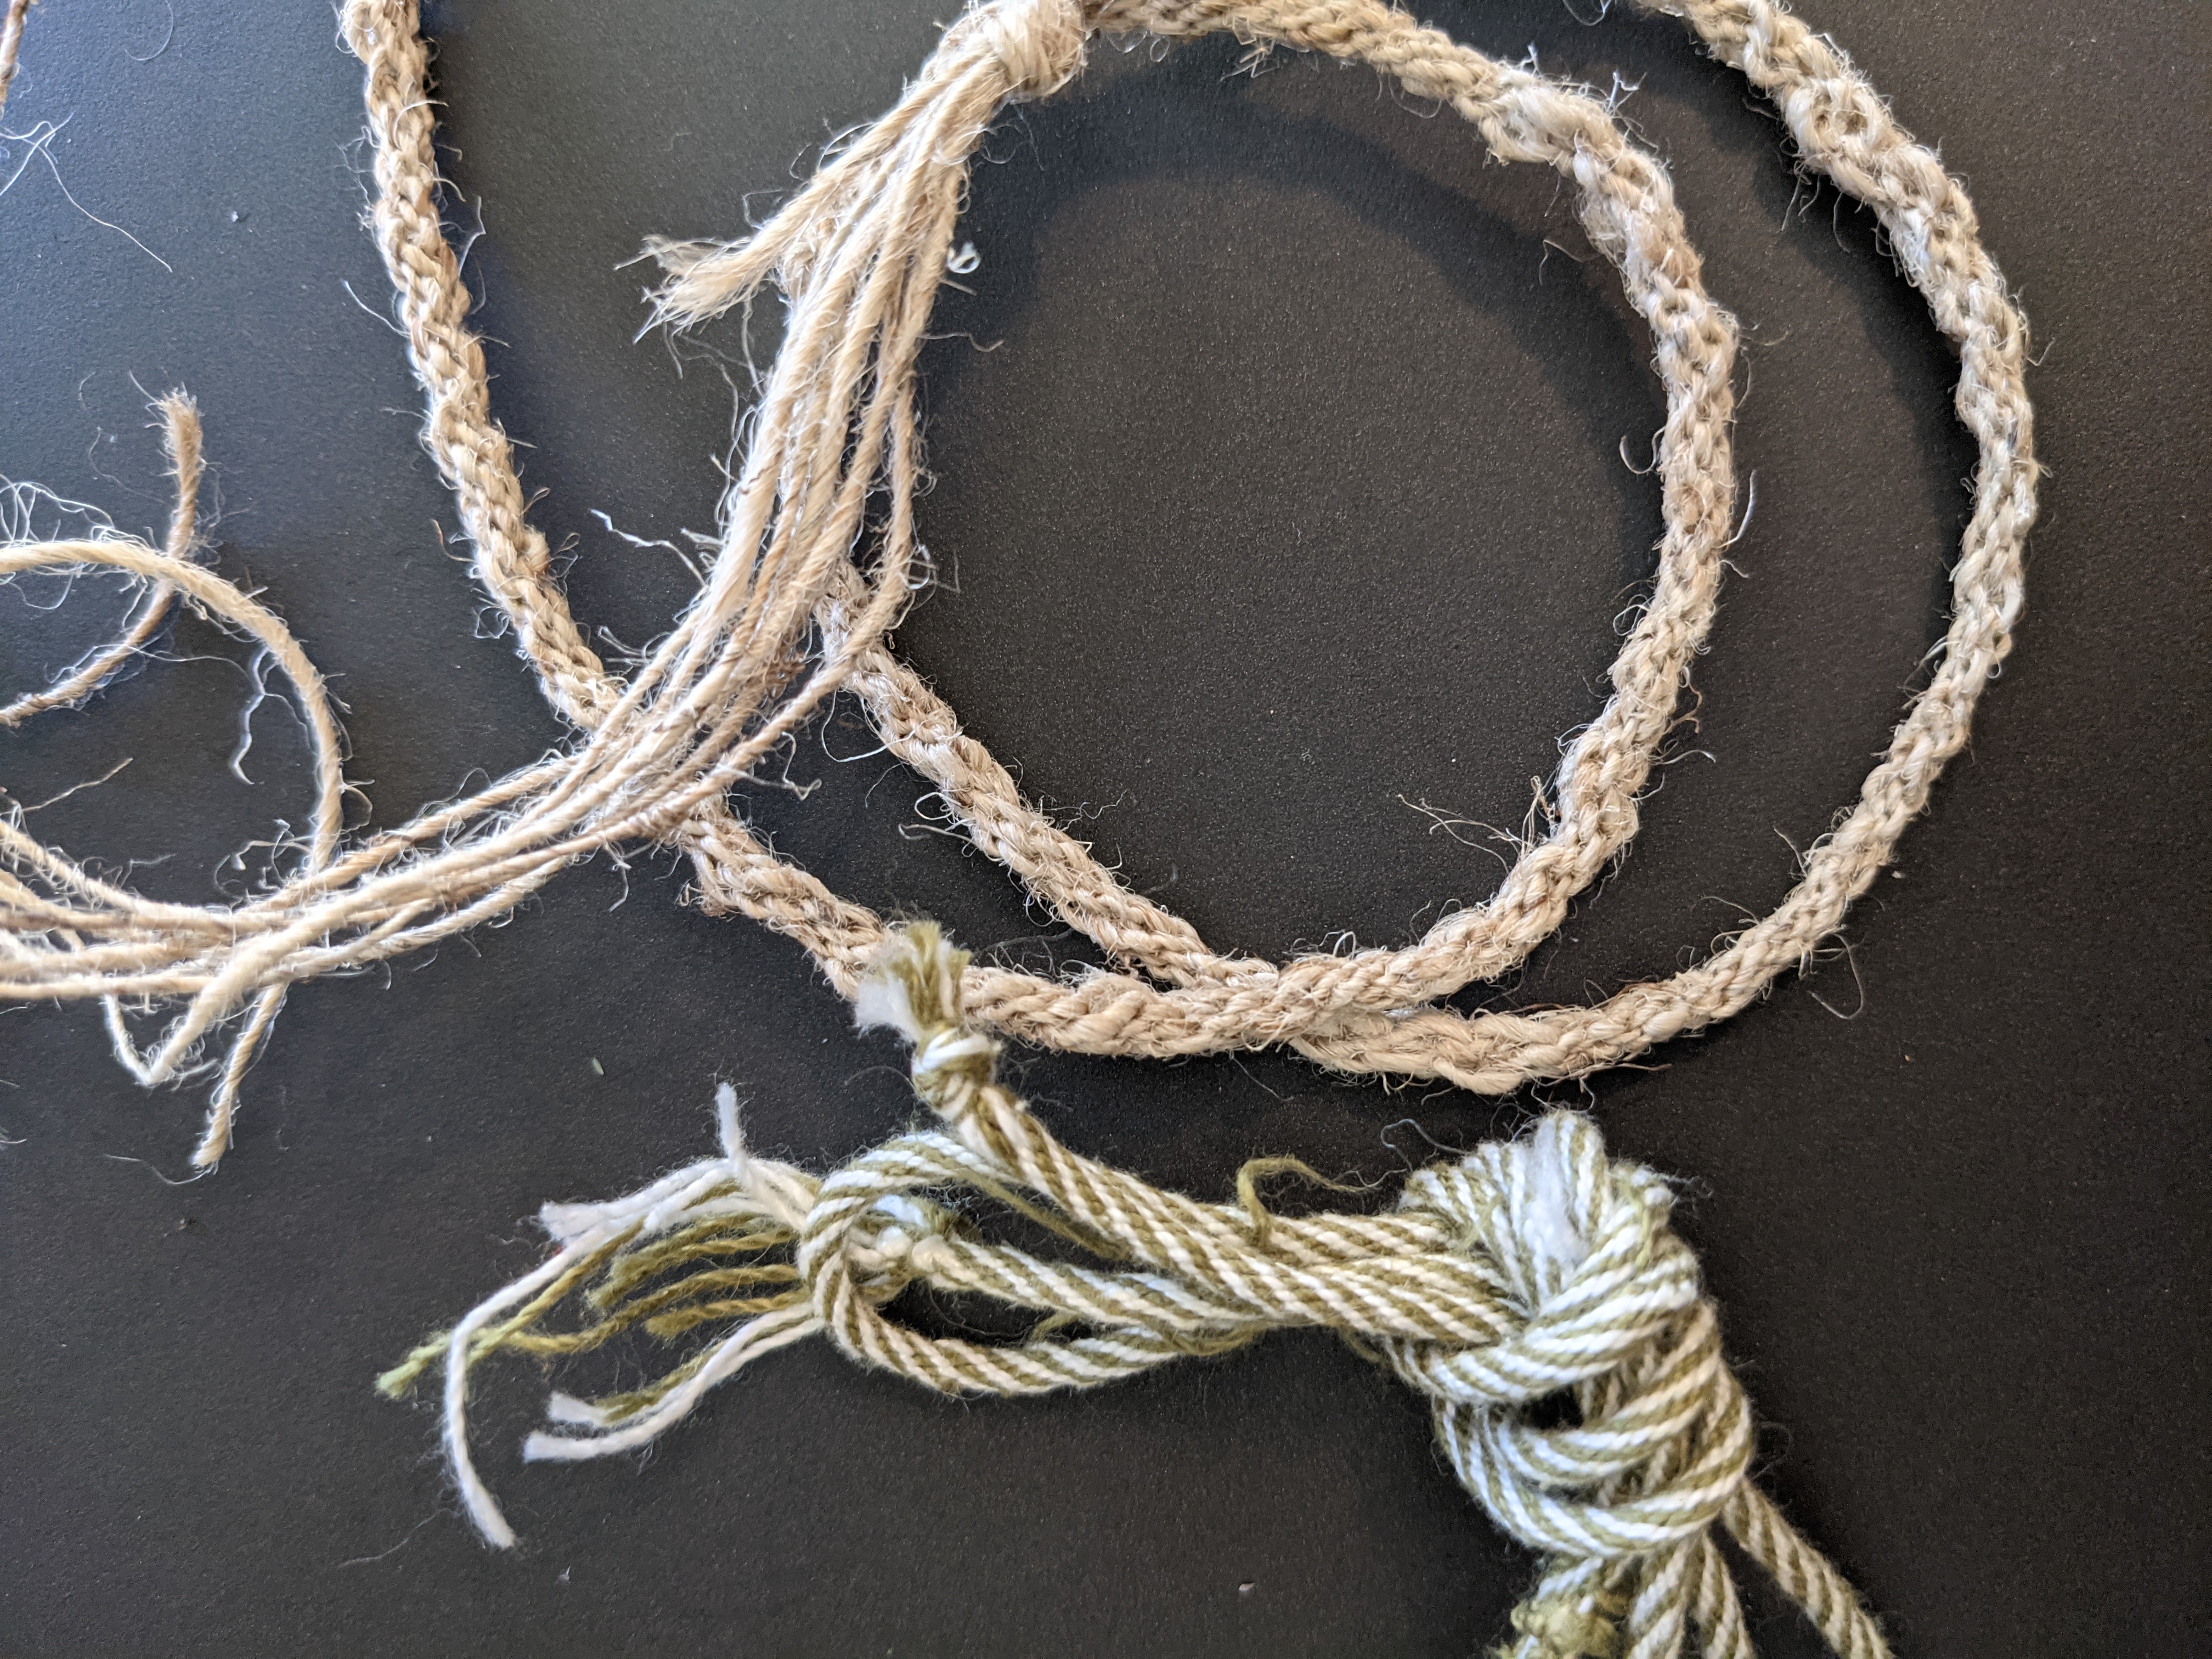 Off-white nettle cord with green and white cotton cord.